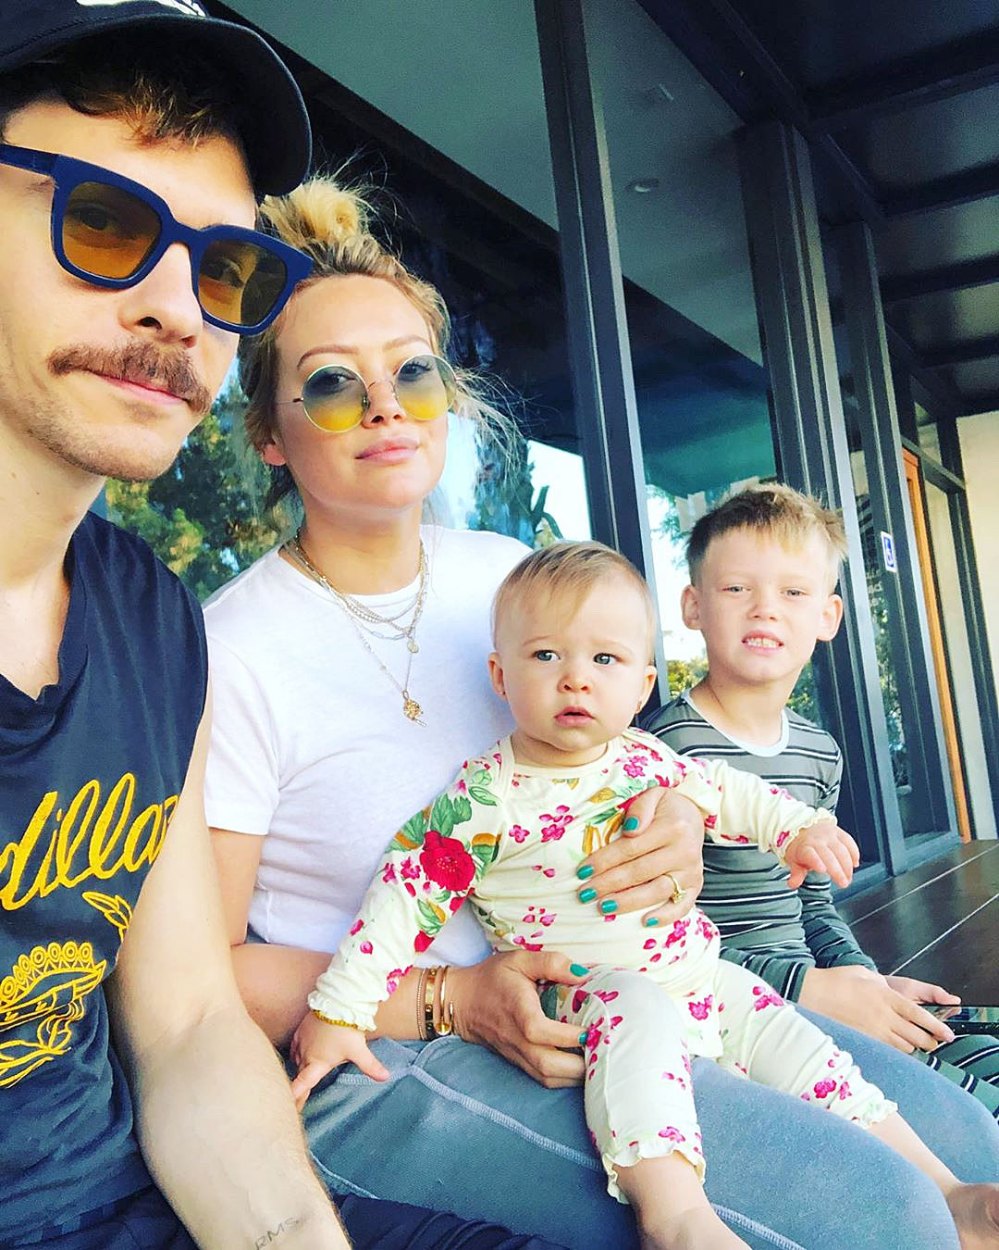 Matthew Korma Hilary Duff and Kids How Hilary Duff Is Teaching Her Kids About Sustainability